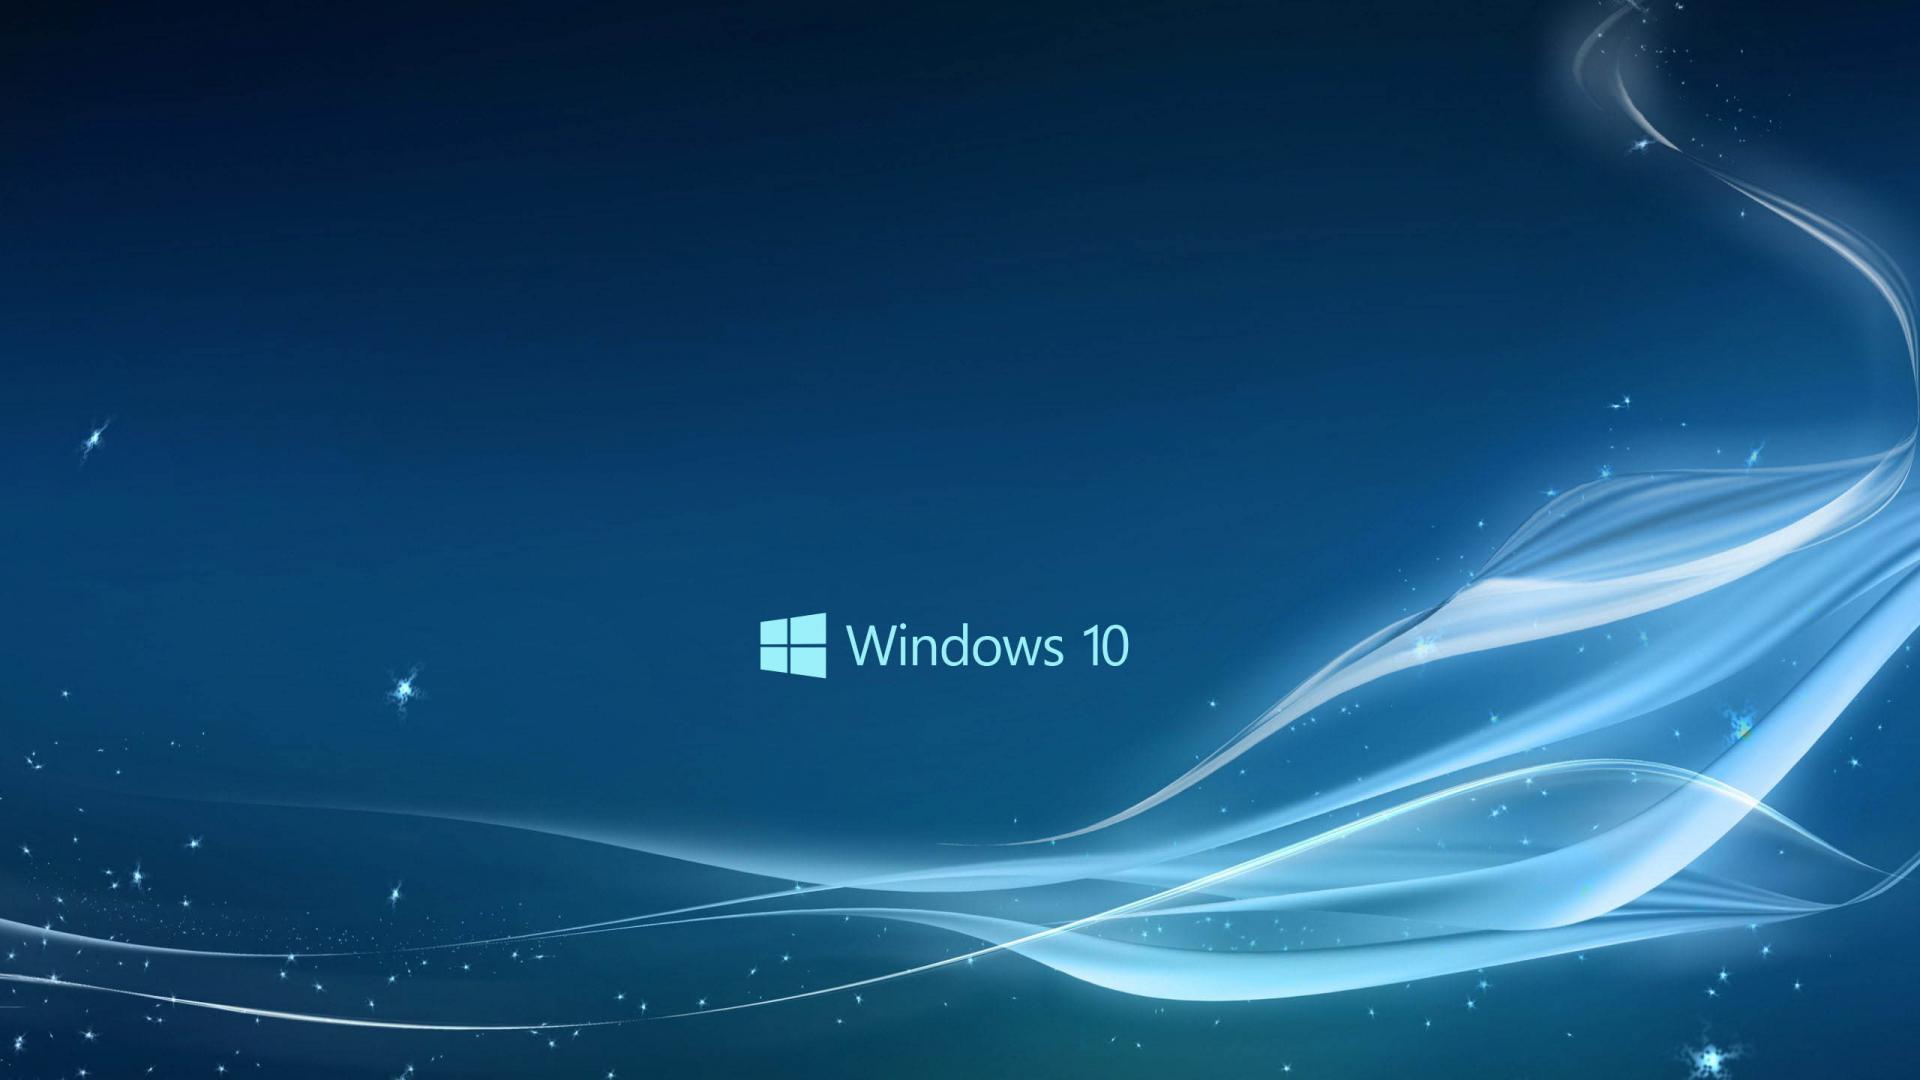 Free Download Windows 10 Wallpaper In Blue Abstract Stars And Waves Hd Wallpapers 19x1080 For Your Desktop Mobile Tablet Explore 50 Dell Wallpaper Windows 10 Dell Windows 7 Desktop